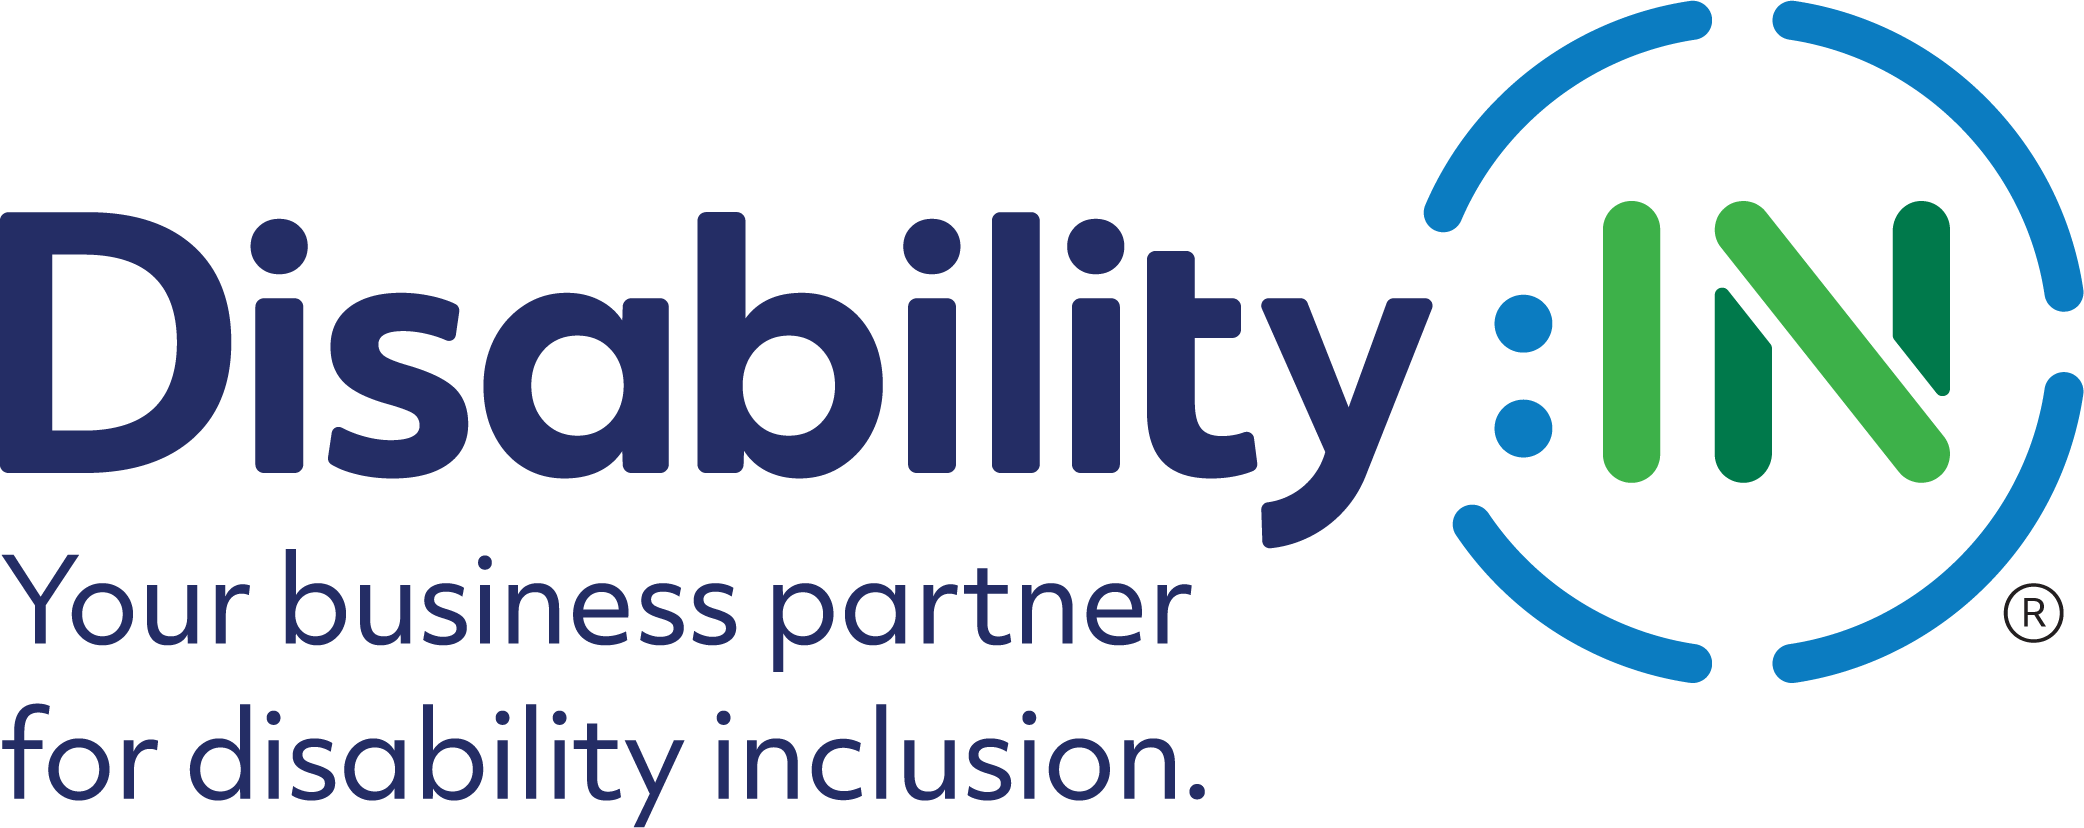 Disability Equality 